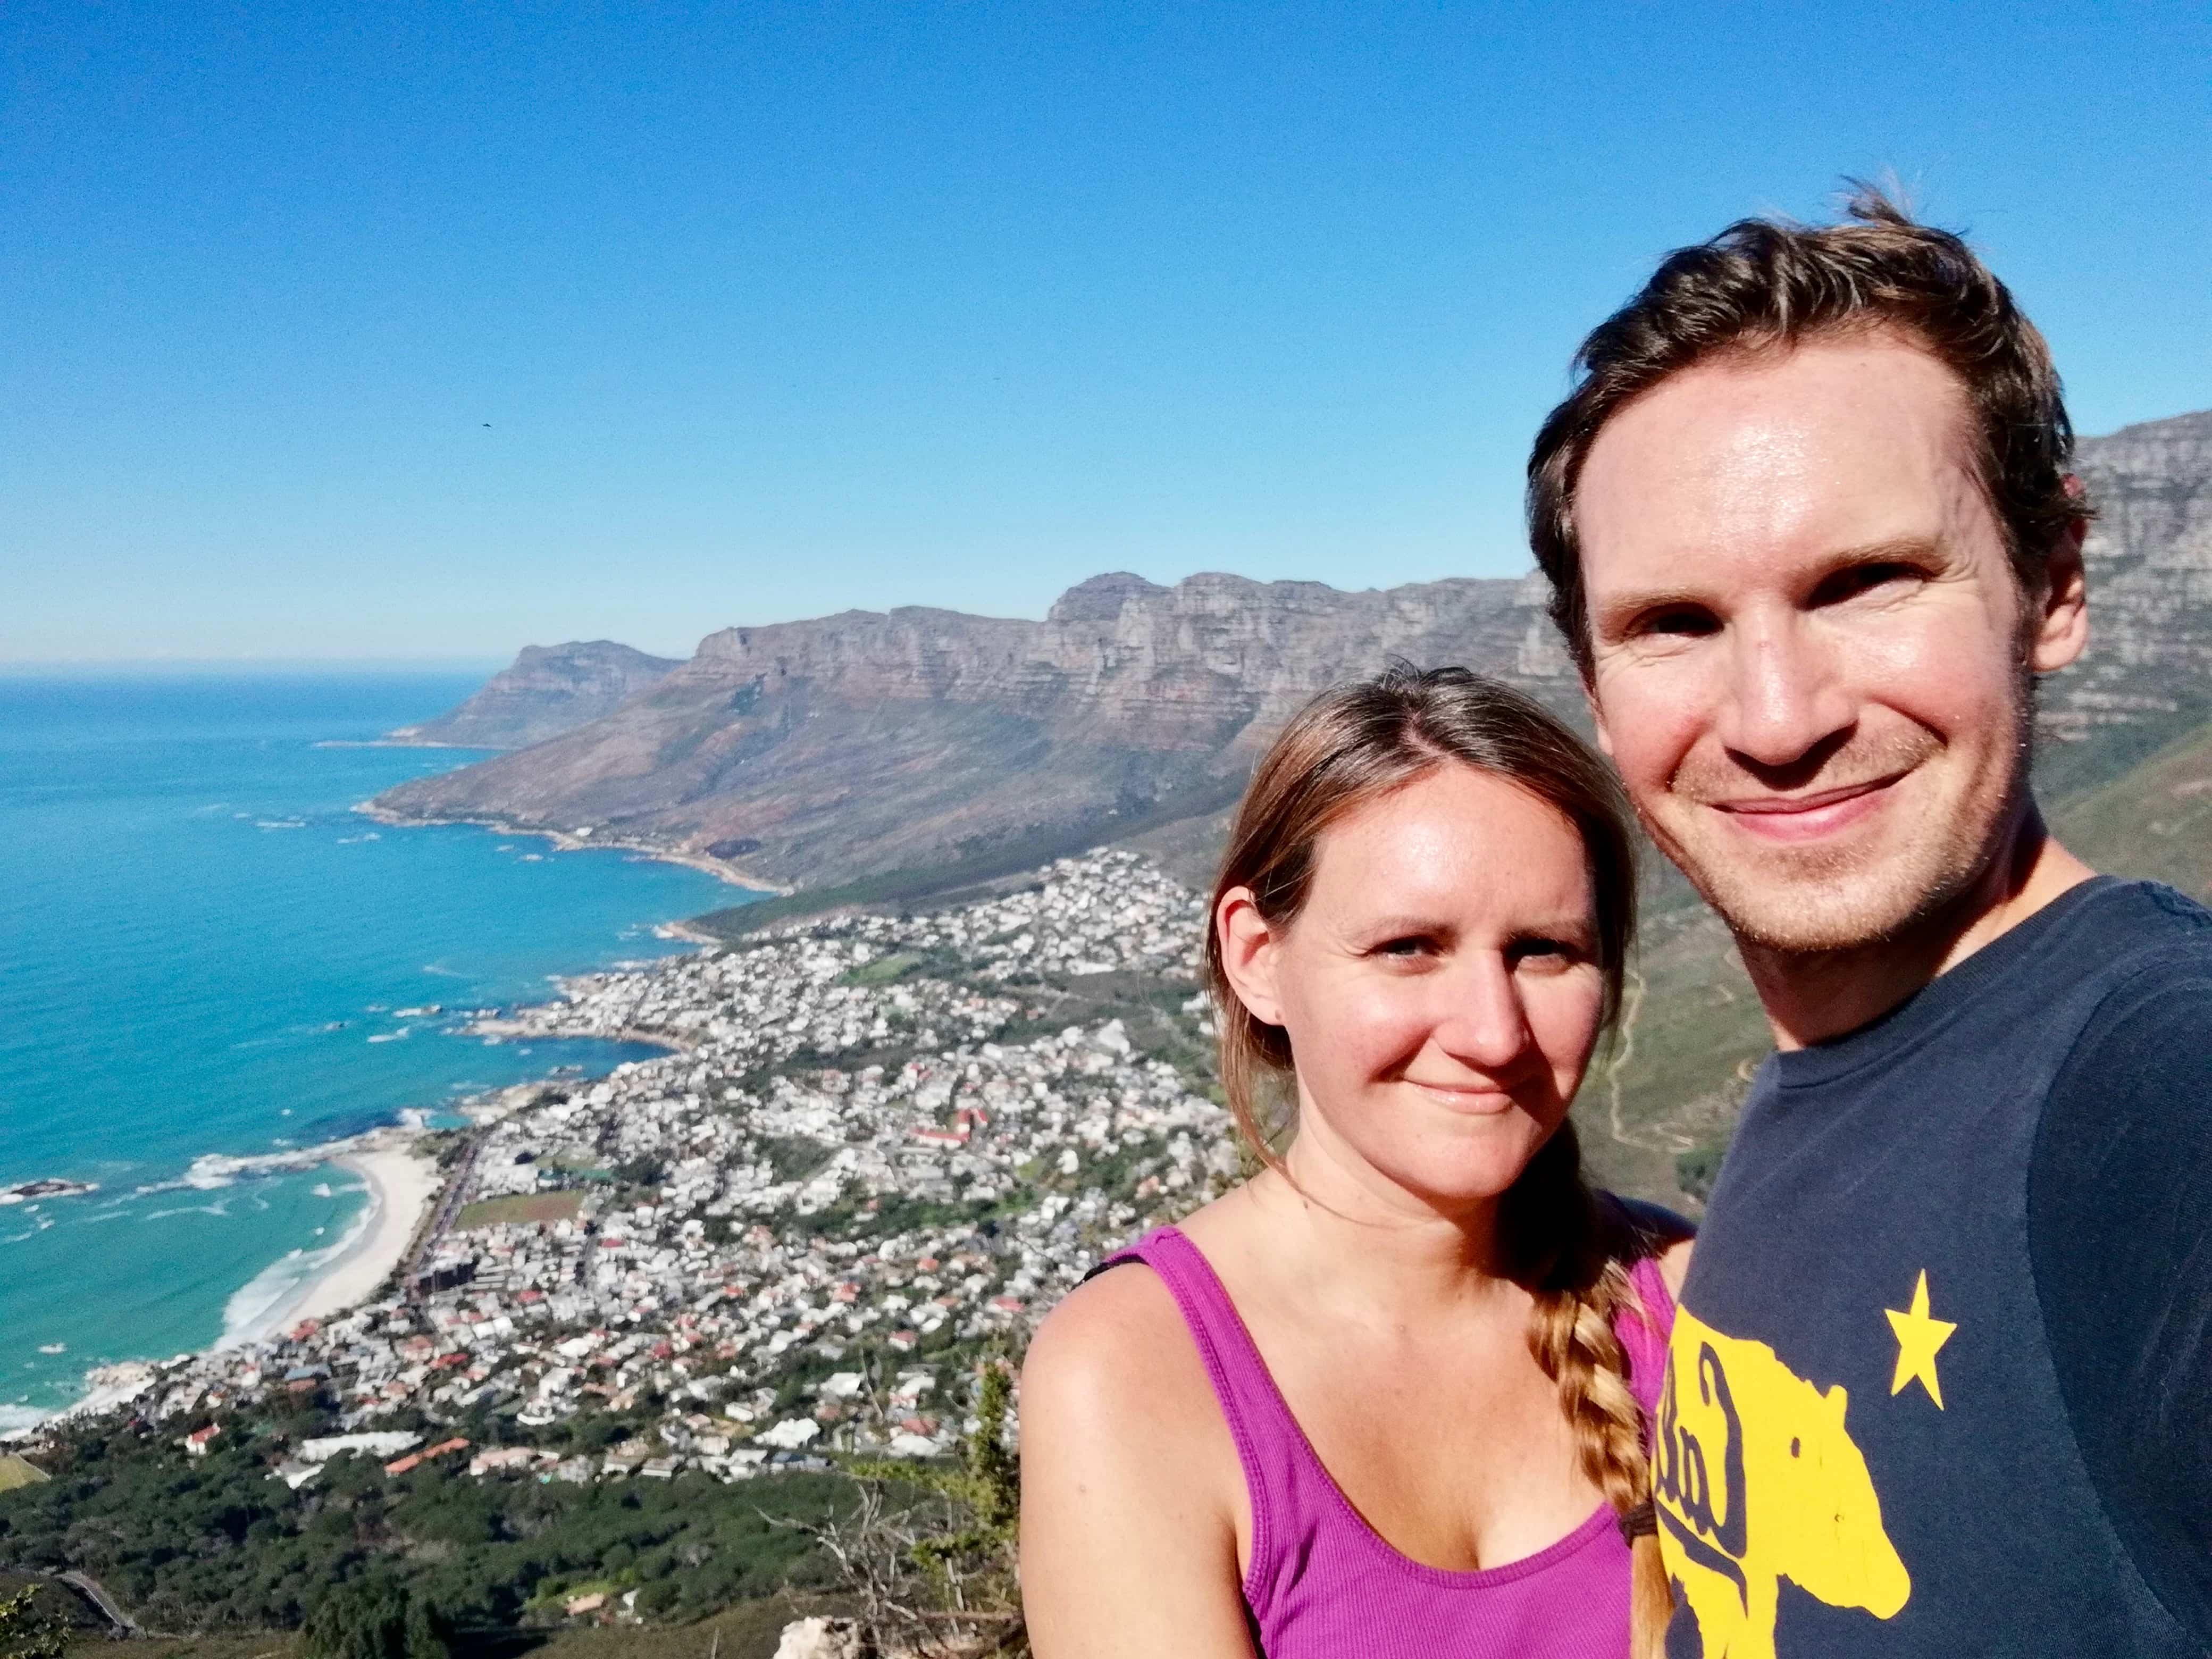 Us hiking Lion's Head in Cape Town